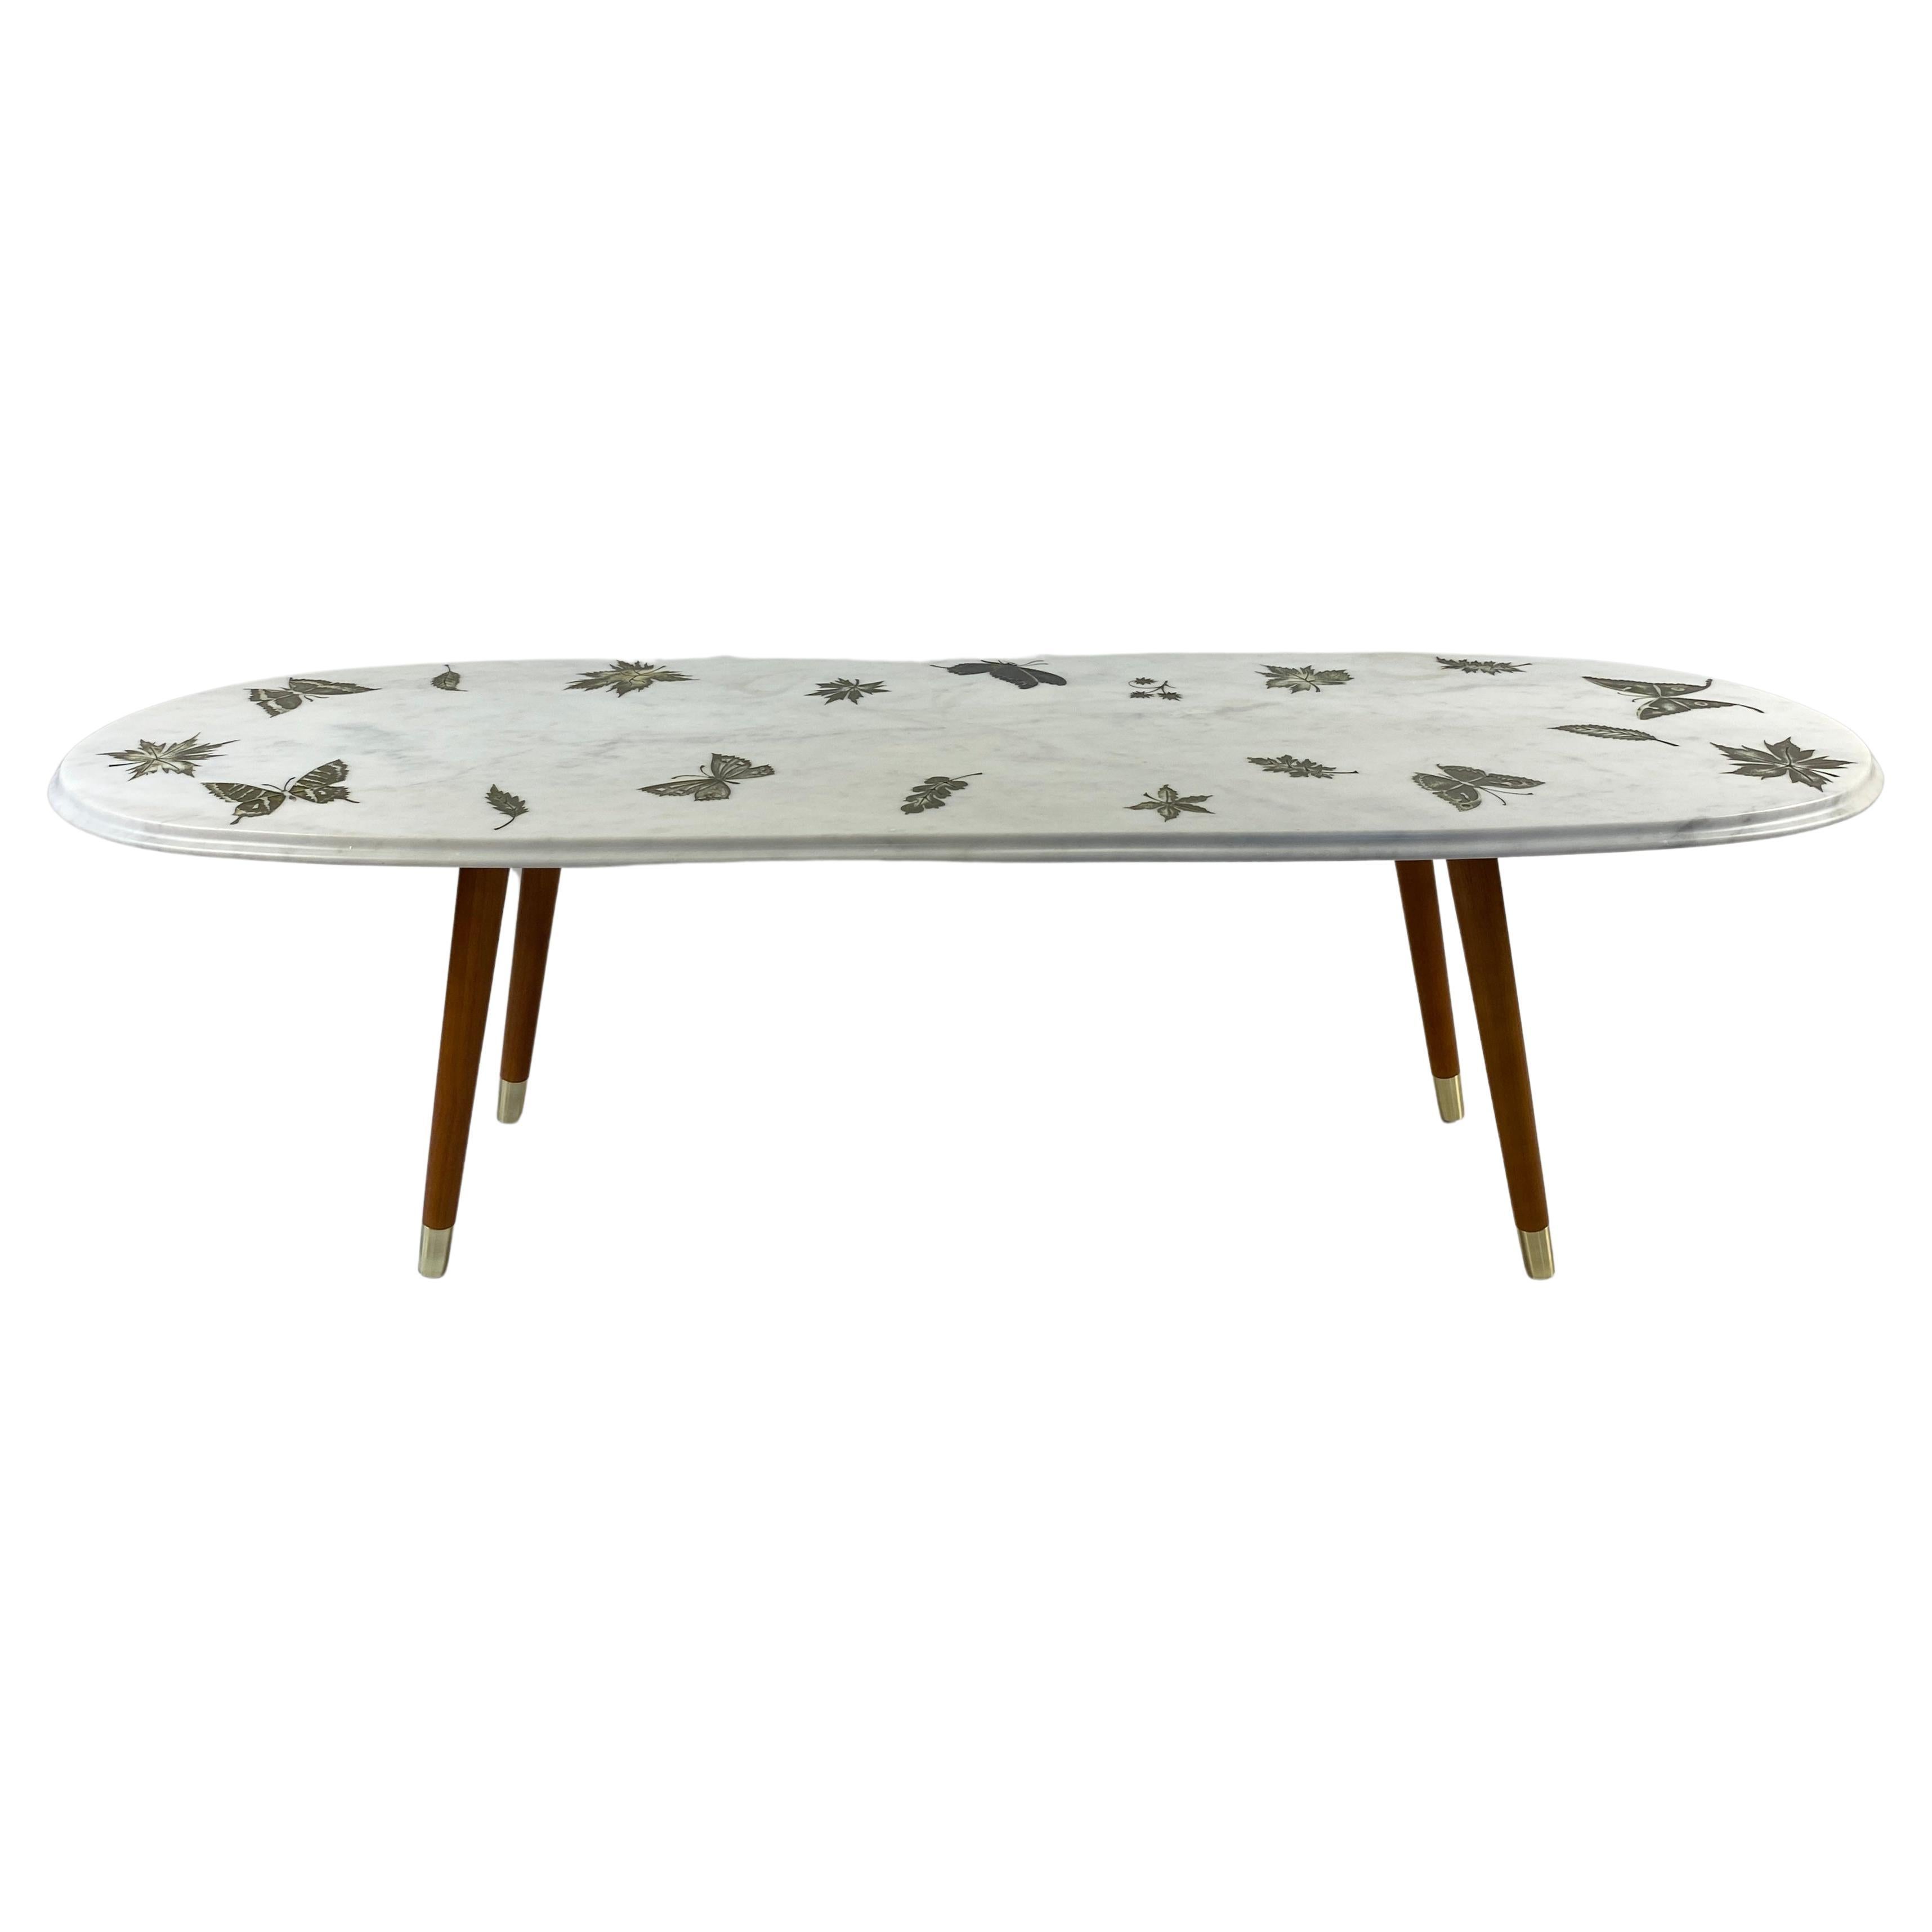 Italian Modernist Oval Carrara Marble Wood and Brass Coffee/Cocktail Table  For Sale